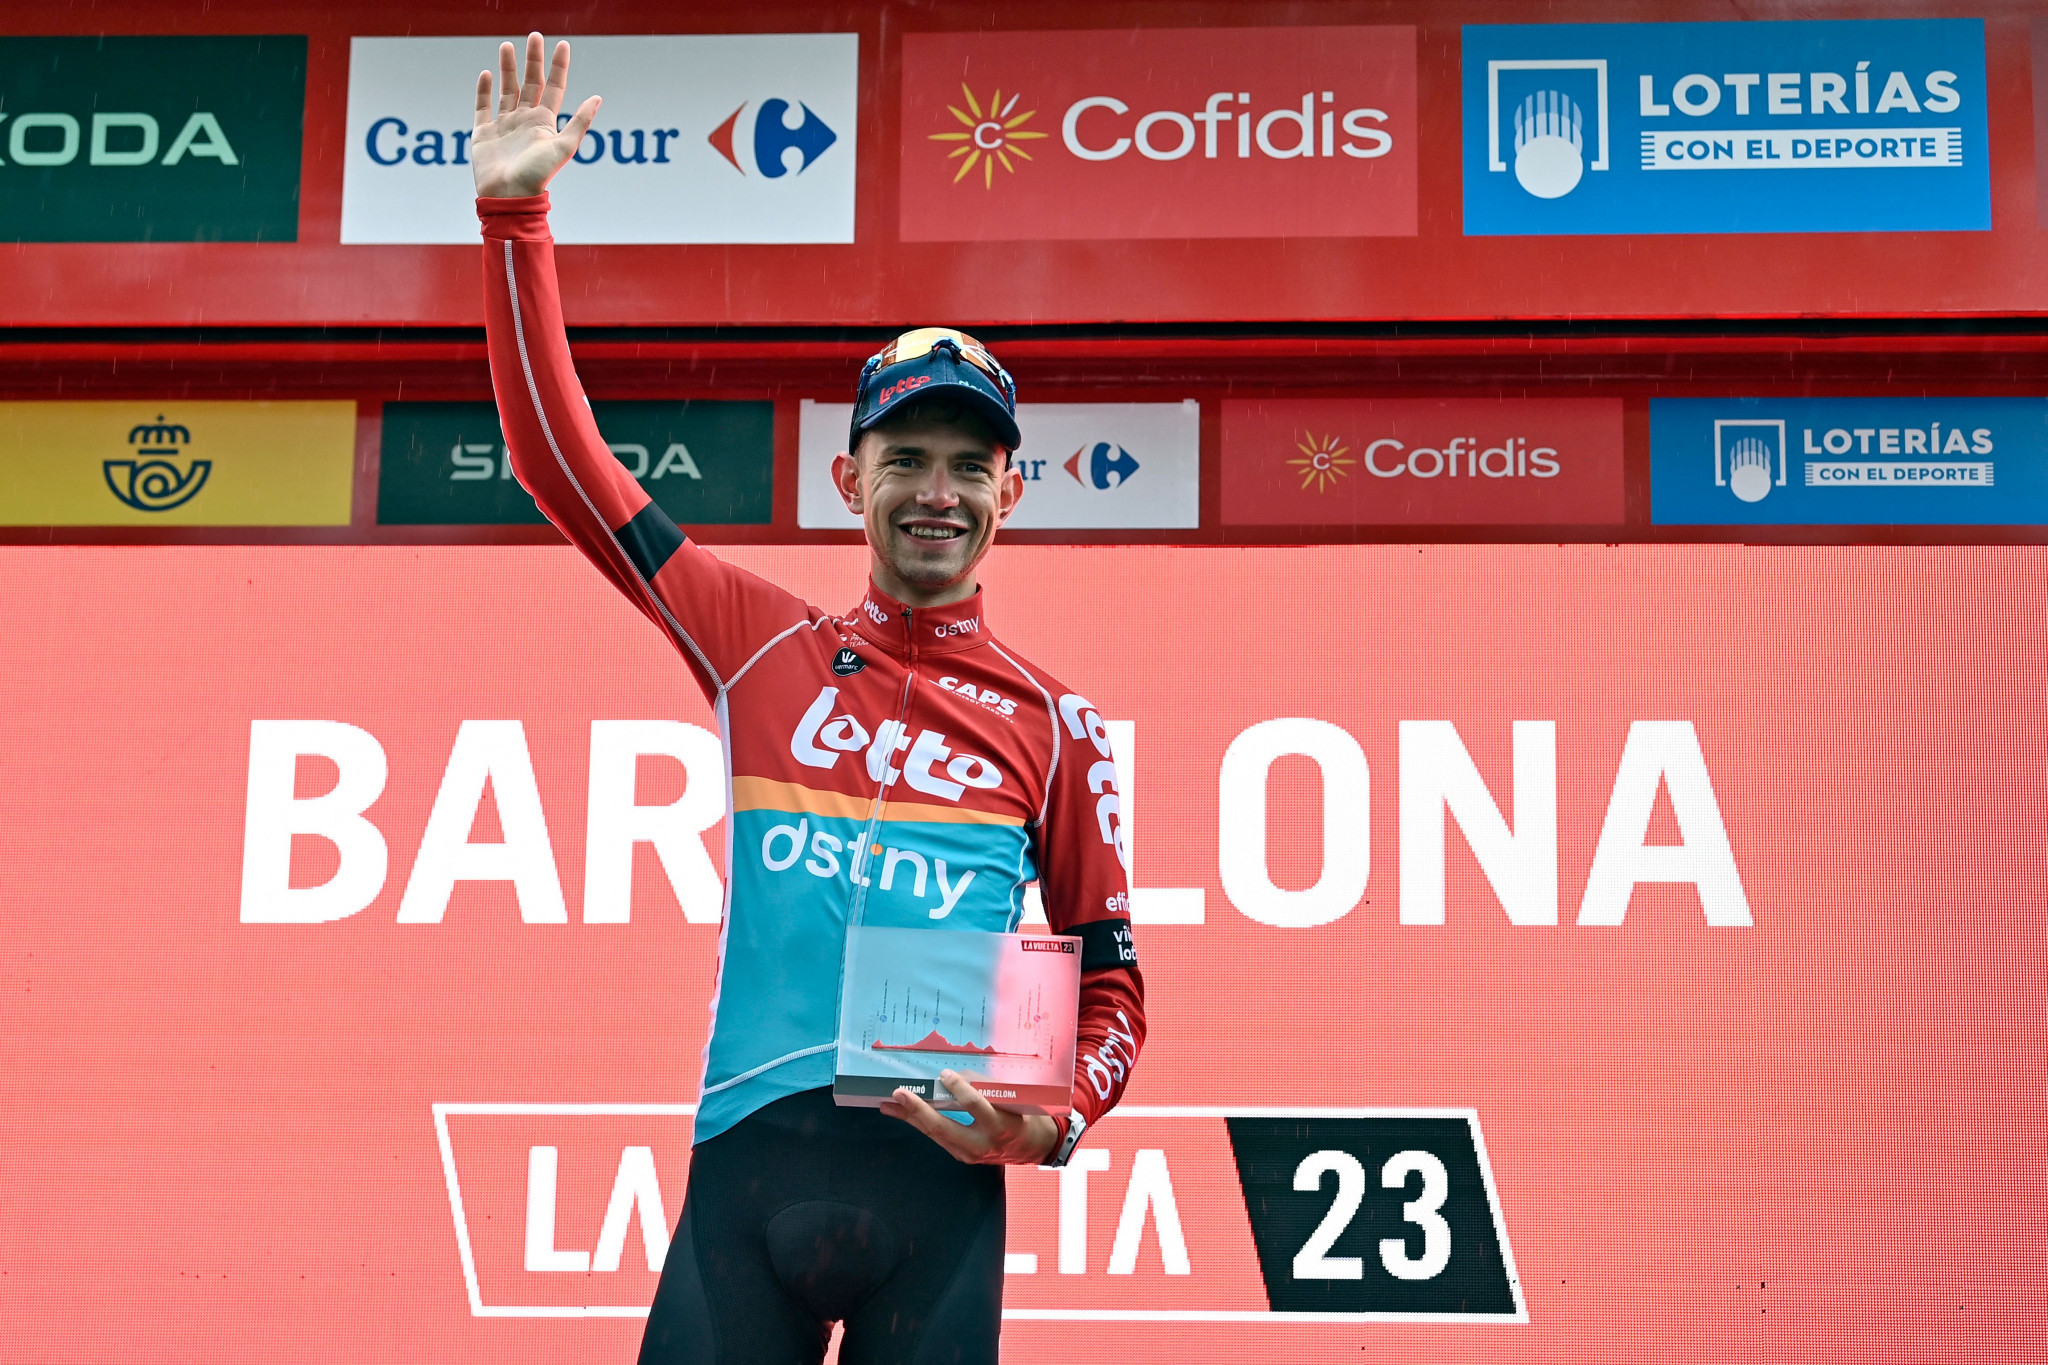 Kron comes out on top of second Vuelta a España stage despite dangerous conditions